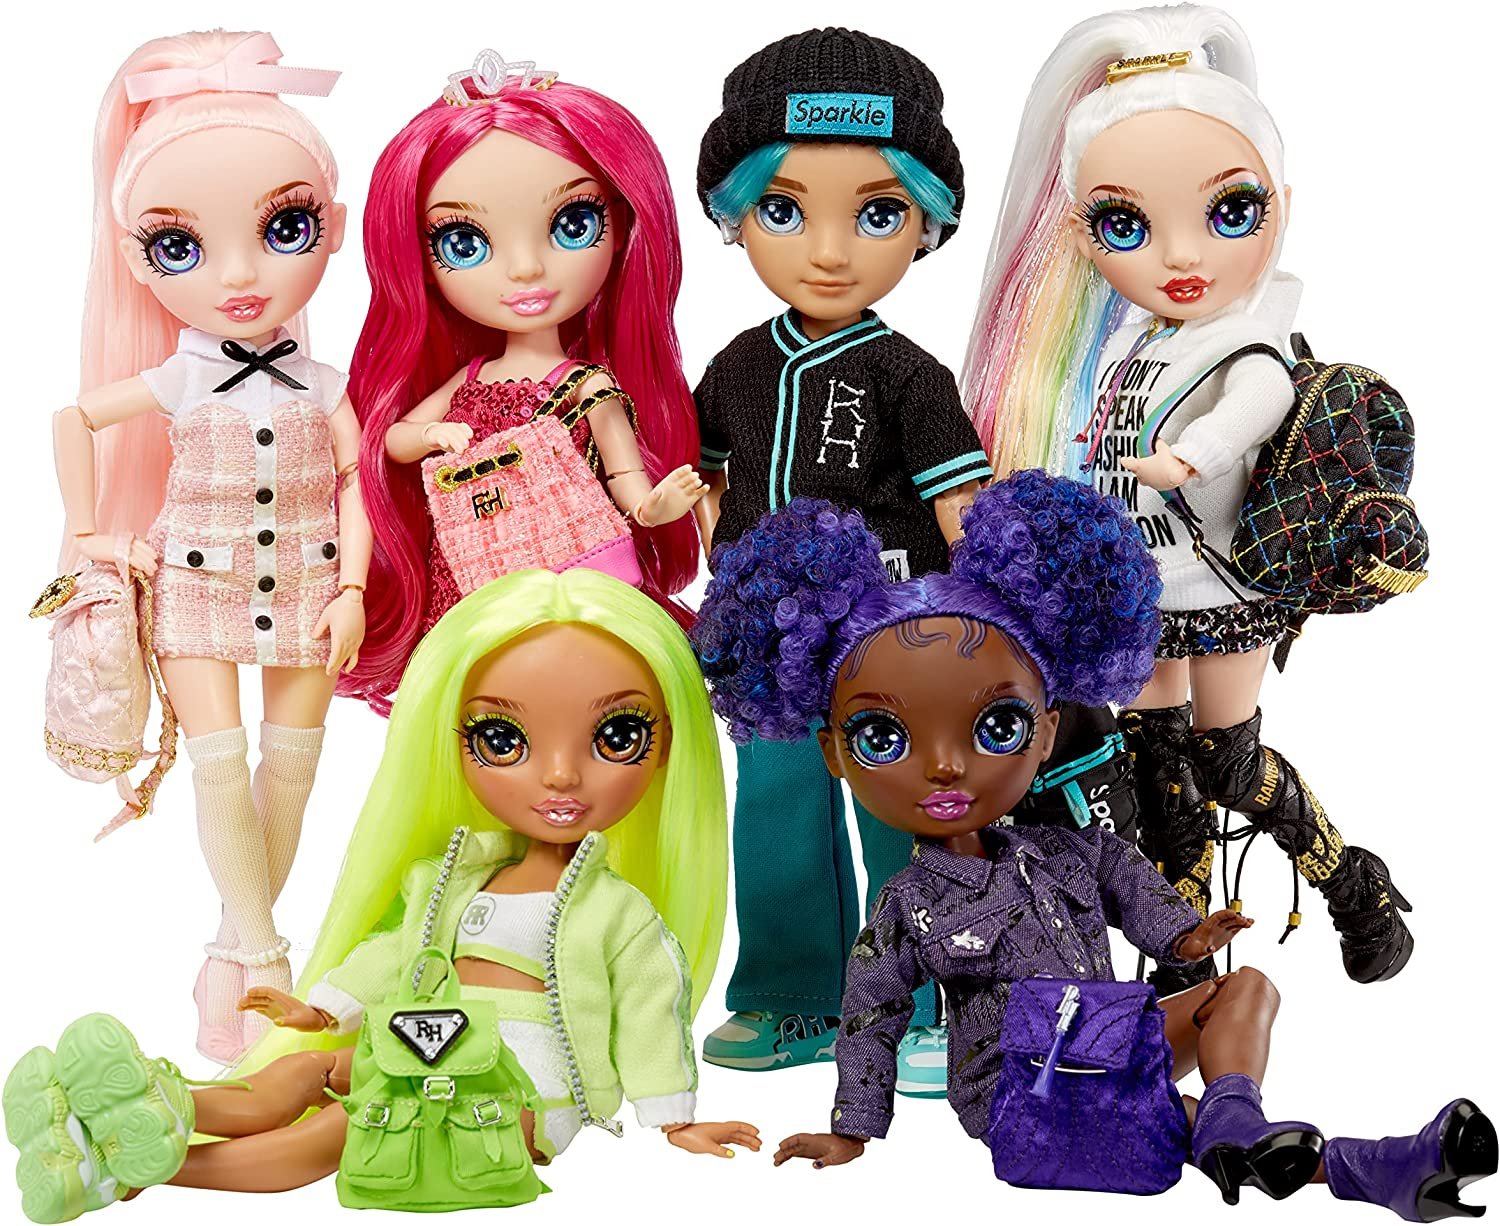 My Avastars Fashion Dolls from WowWee Review! 